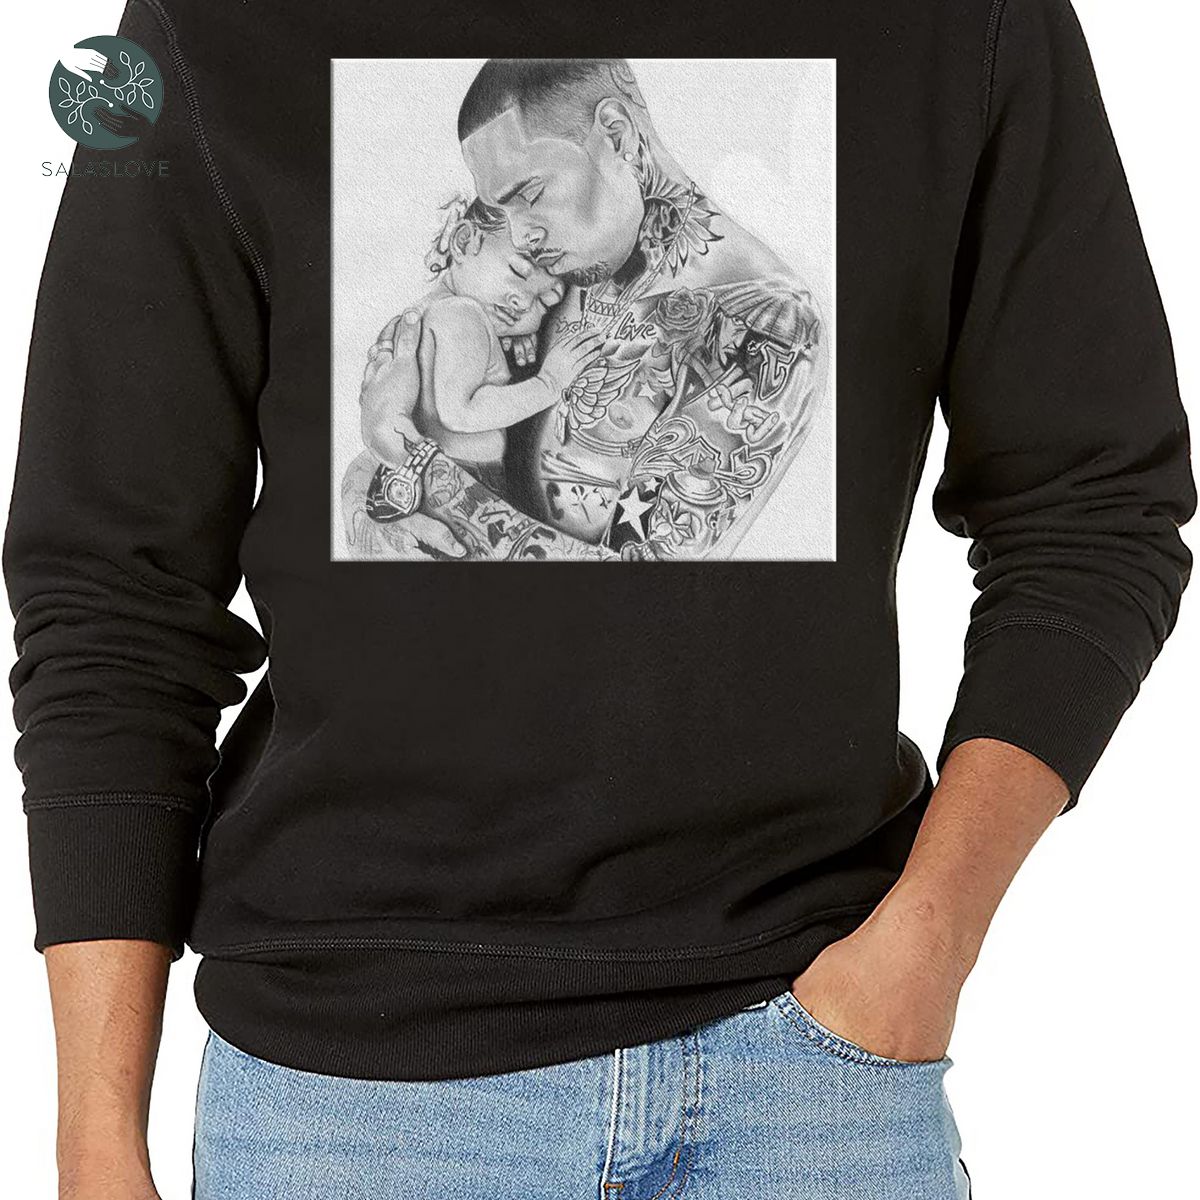 Chris Brown and Royalty Daughter T-shirt